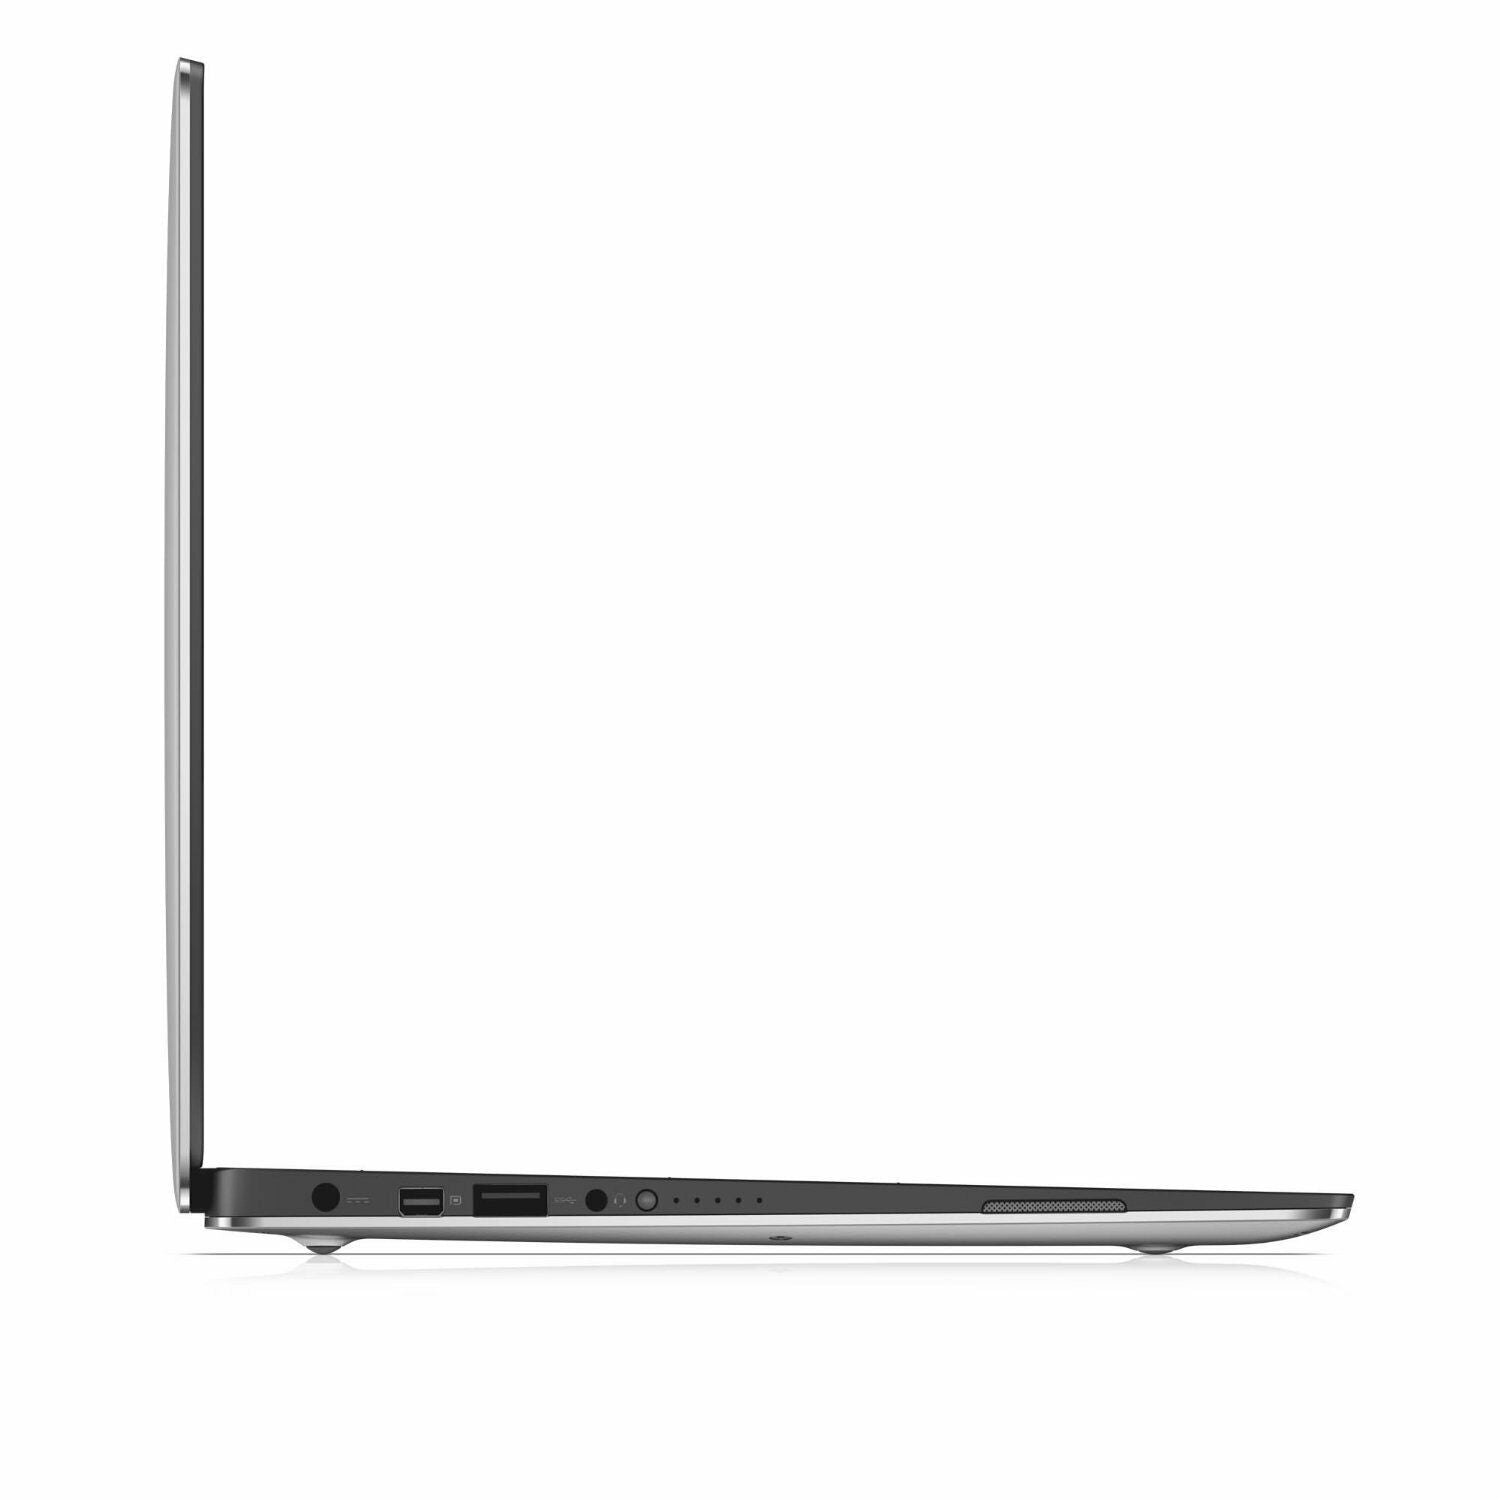 Dell XPS 15" Touch Screen Laptop Core i5-6300HQ 2.3GHz 8GB RAM 119GB SSD, Silver